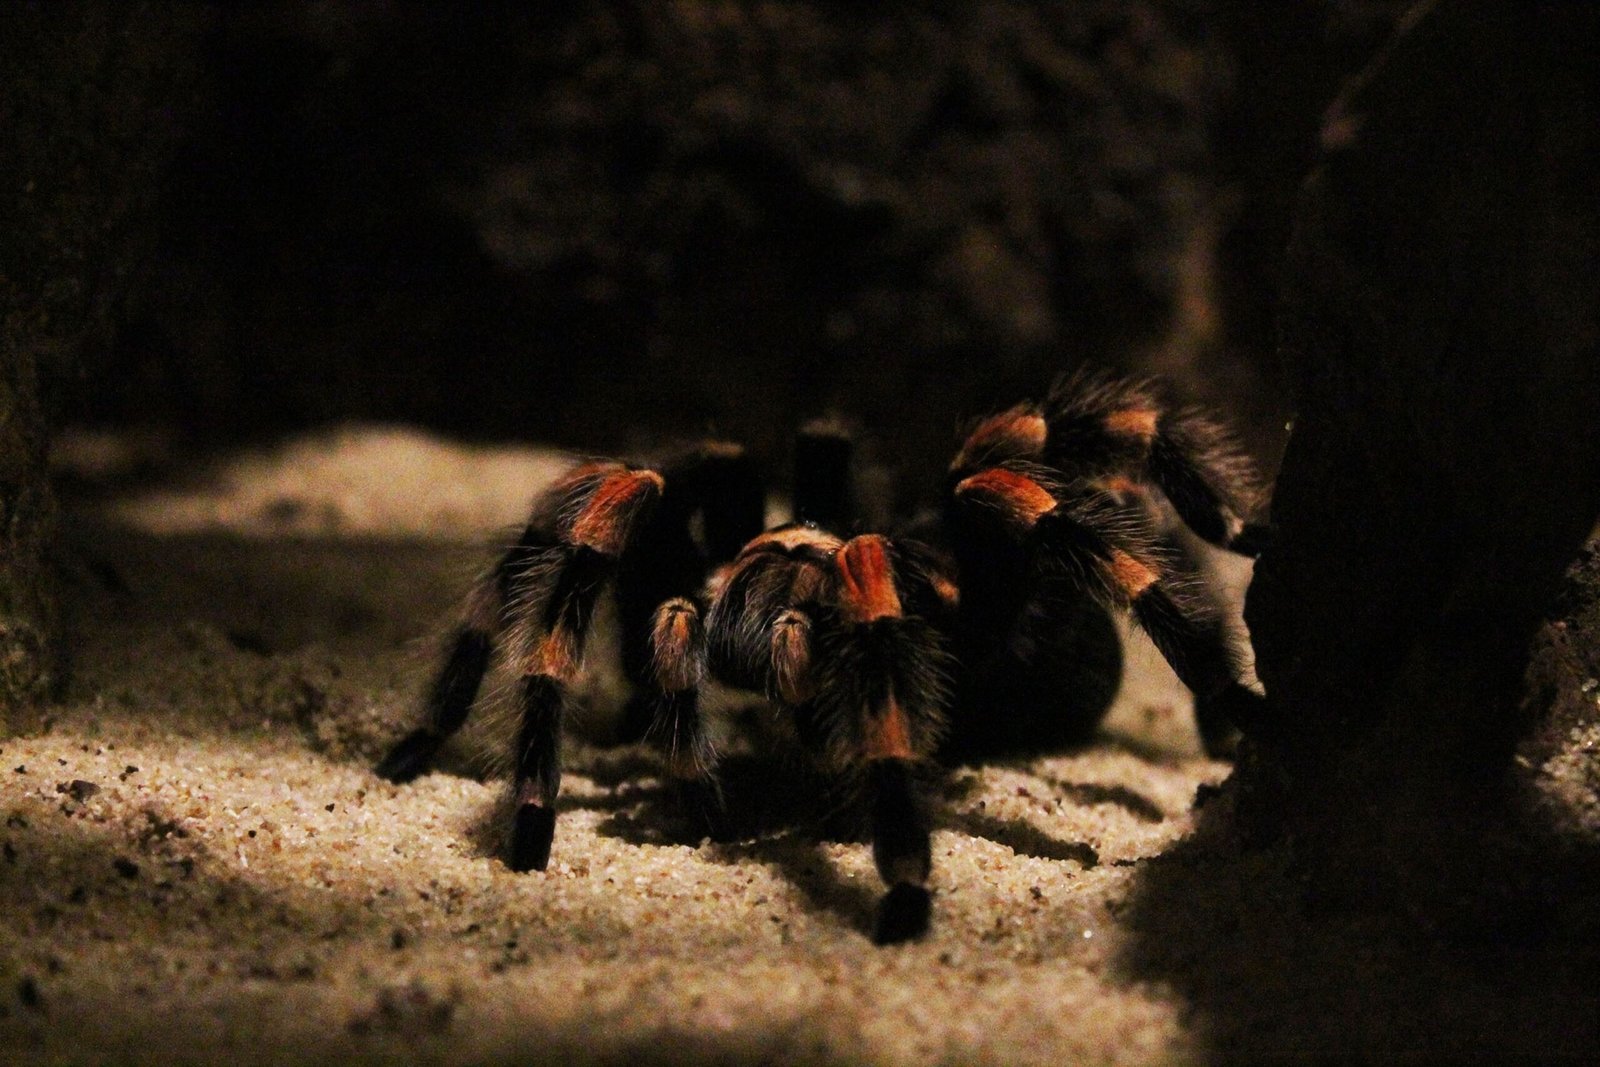 How Do You Handle And Care For The Enigmatic Pinktoe Tarantula With Its Distinctive Pinkish Feet?